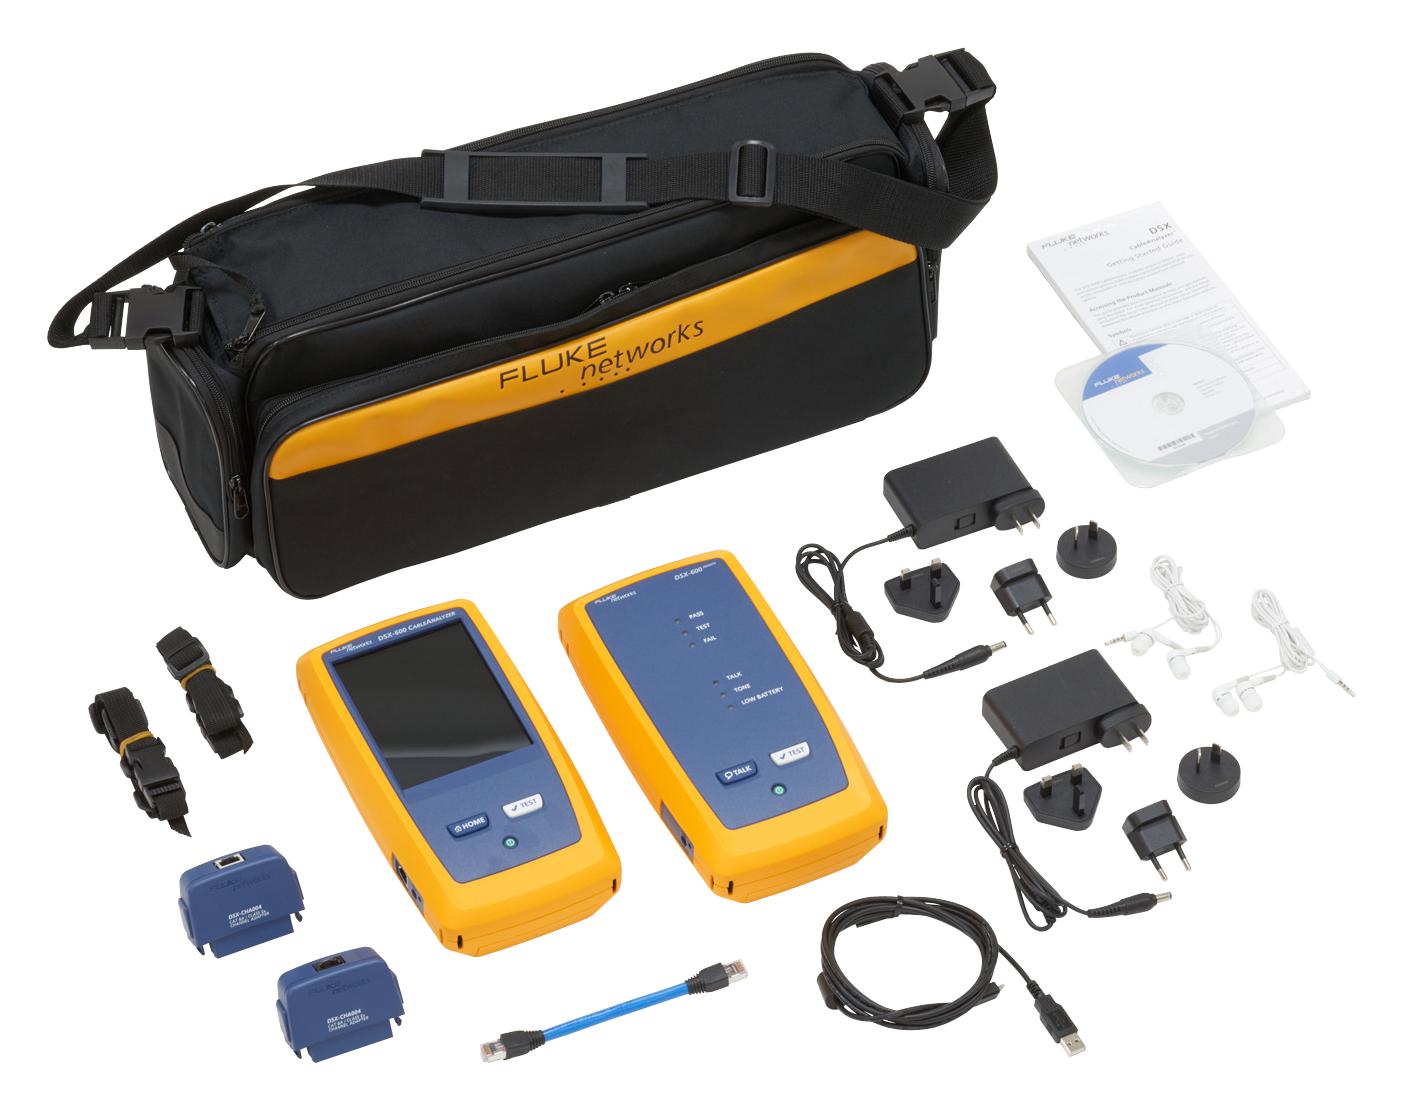 DSX-602-NW INT NETWORK CABLE ANALYSER, LCD FLUKE NETWORKS